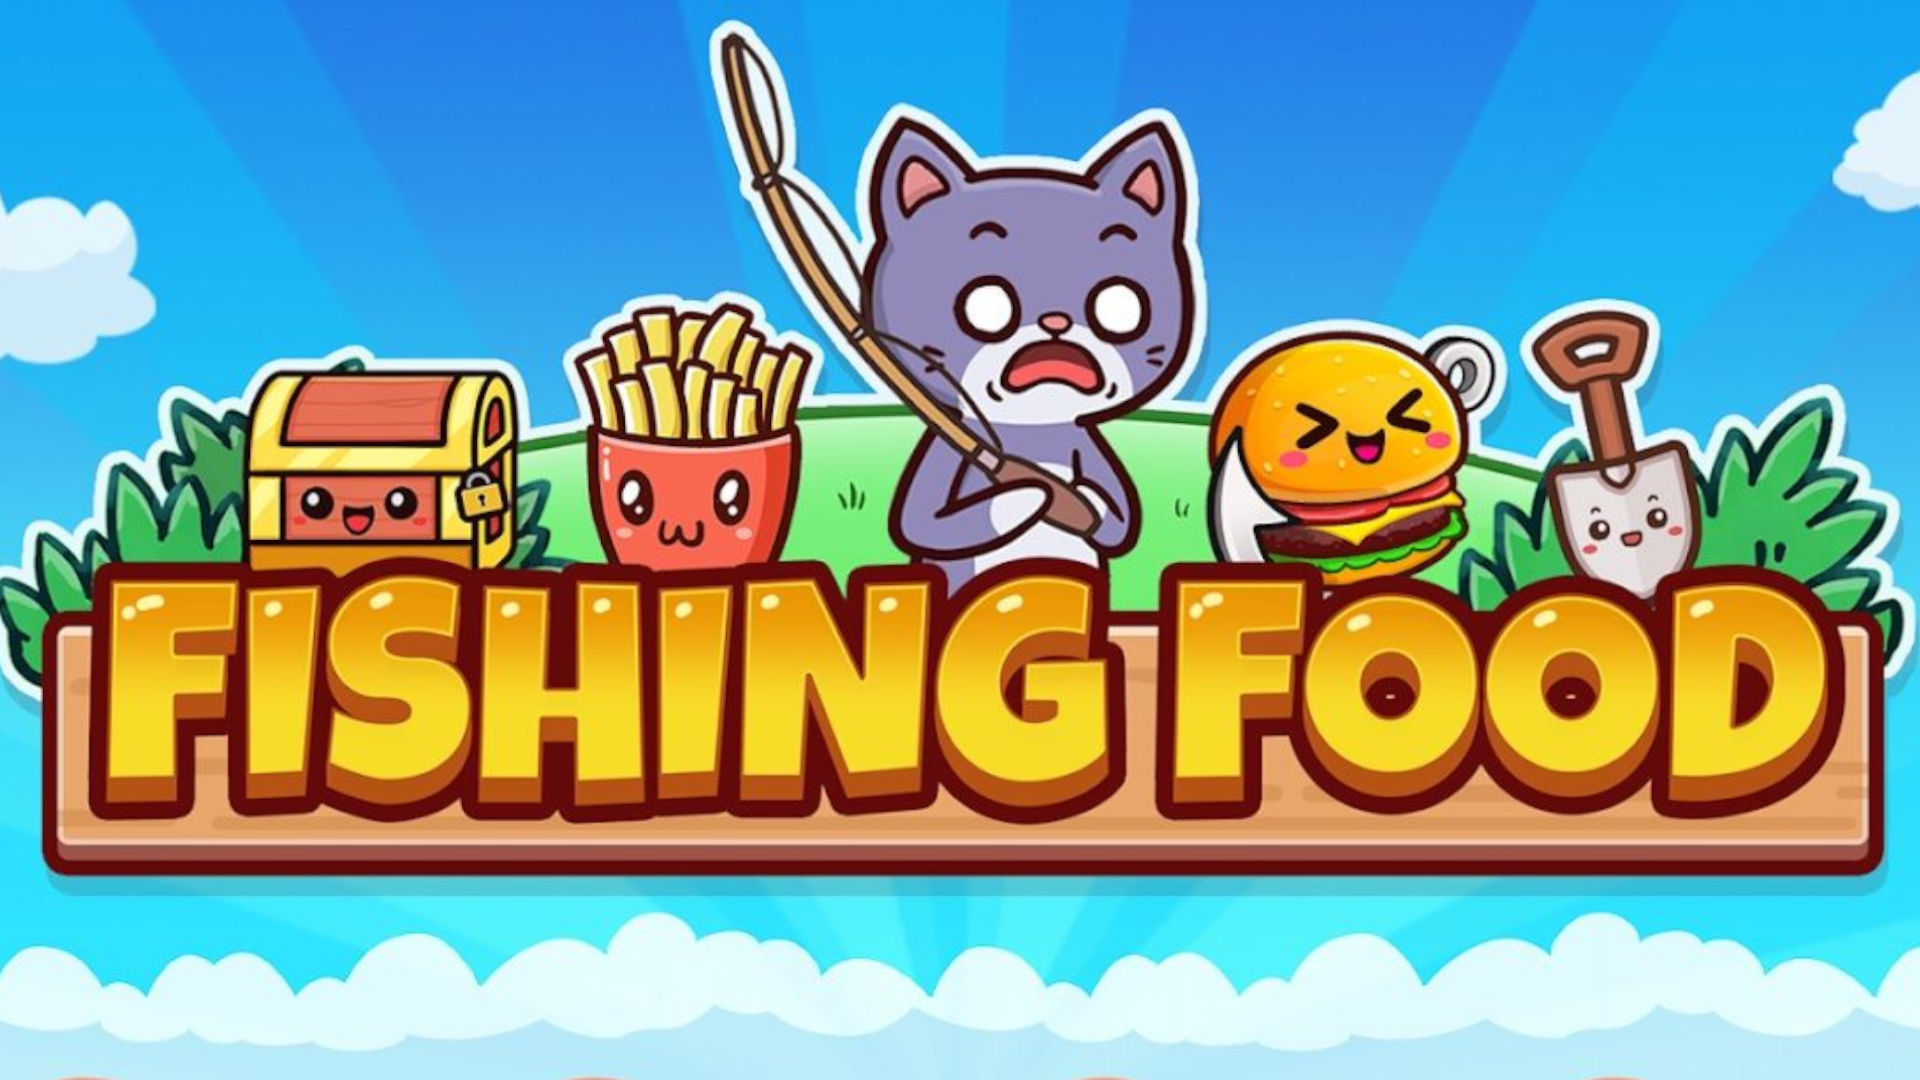 Fishing games on Switch and mobile | Pocket Tactics